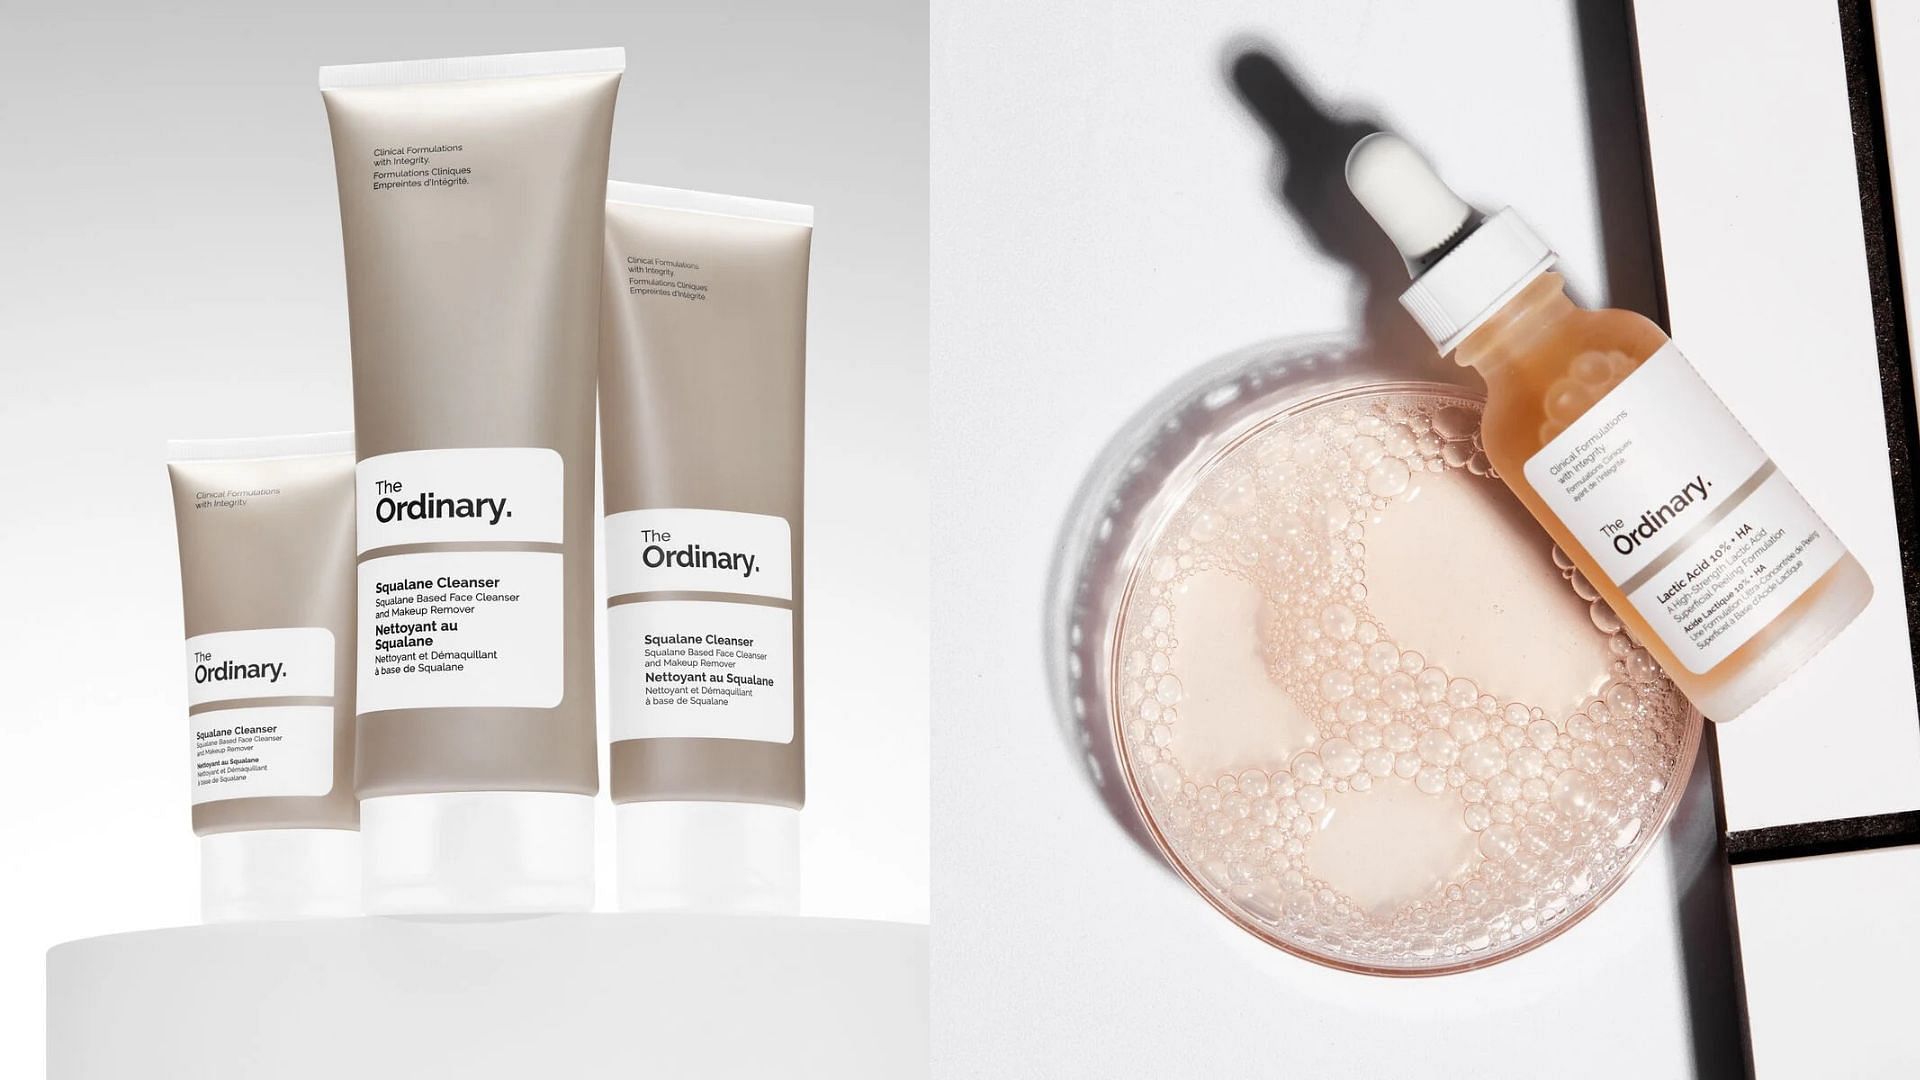 Best Ordinary skincare products 